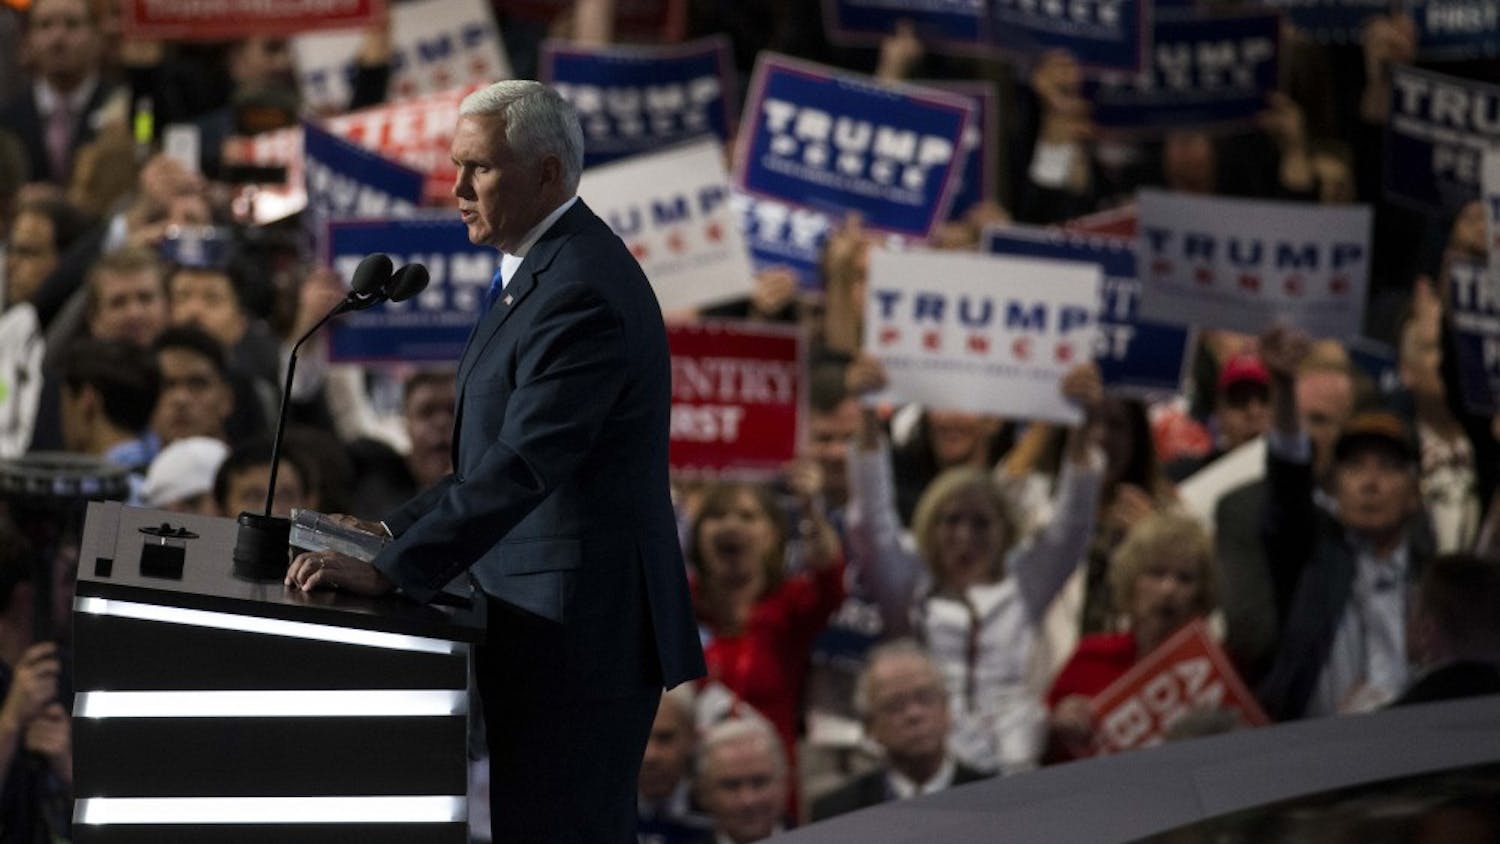 Governor Mike Pence speaks at the Republican National Convention on July 20 at the Quicken Loans Arena in Cleveland, Ohio. Pence has been chosen as Donald Trump's running mate.